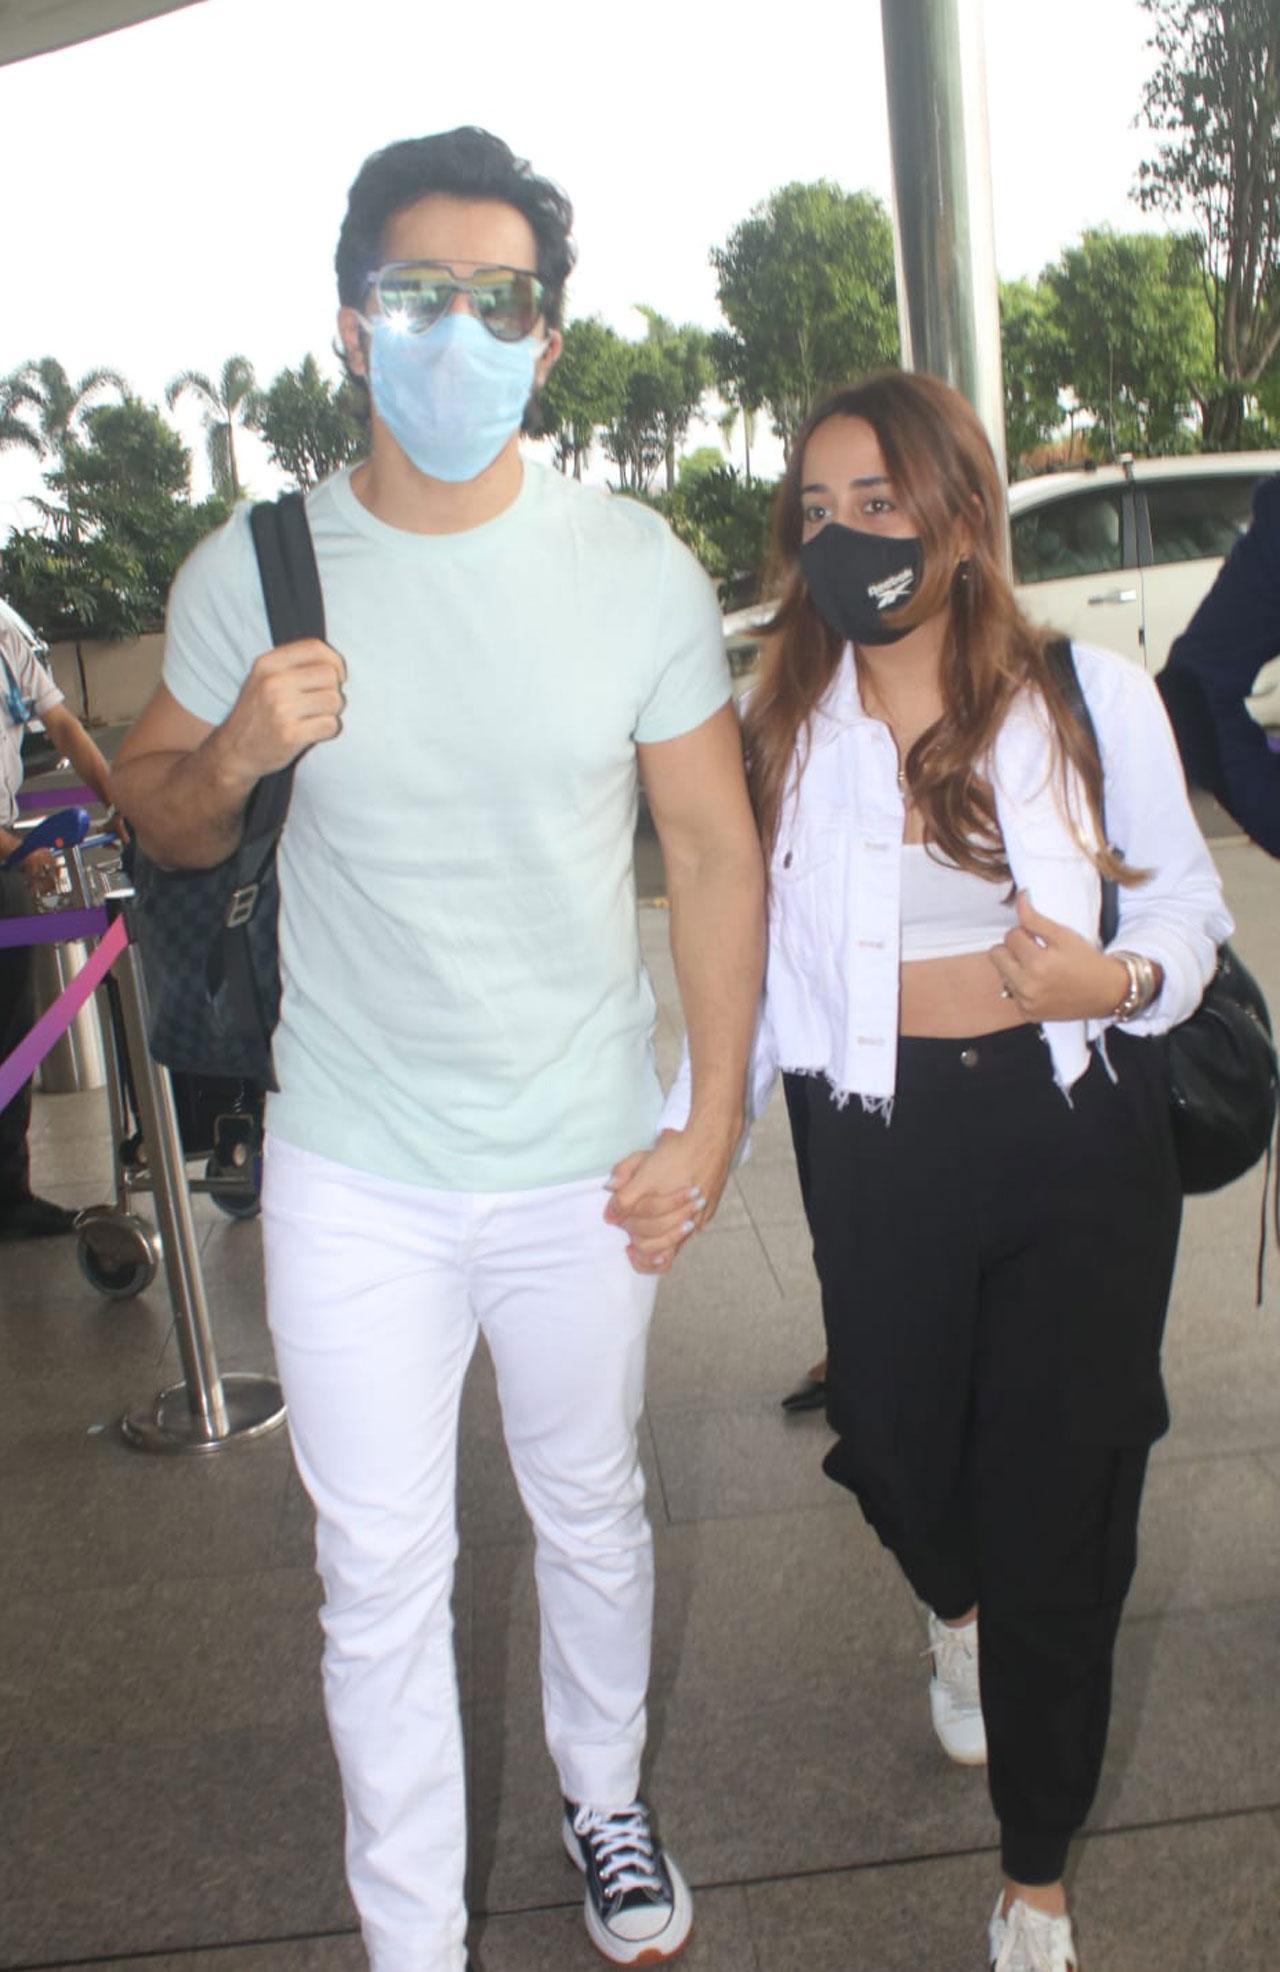 Varun Dhawan and Natasha Dalal were clicked together at the airport. Despite the Covid-19 restrictions, the couple had a big, fat Indian wedding and the only people from Bollywood that fans could spot were Karan Johar, Kunal Kohli, and Shashank Khaitan.